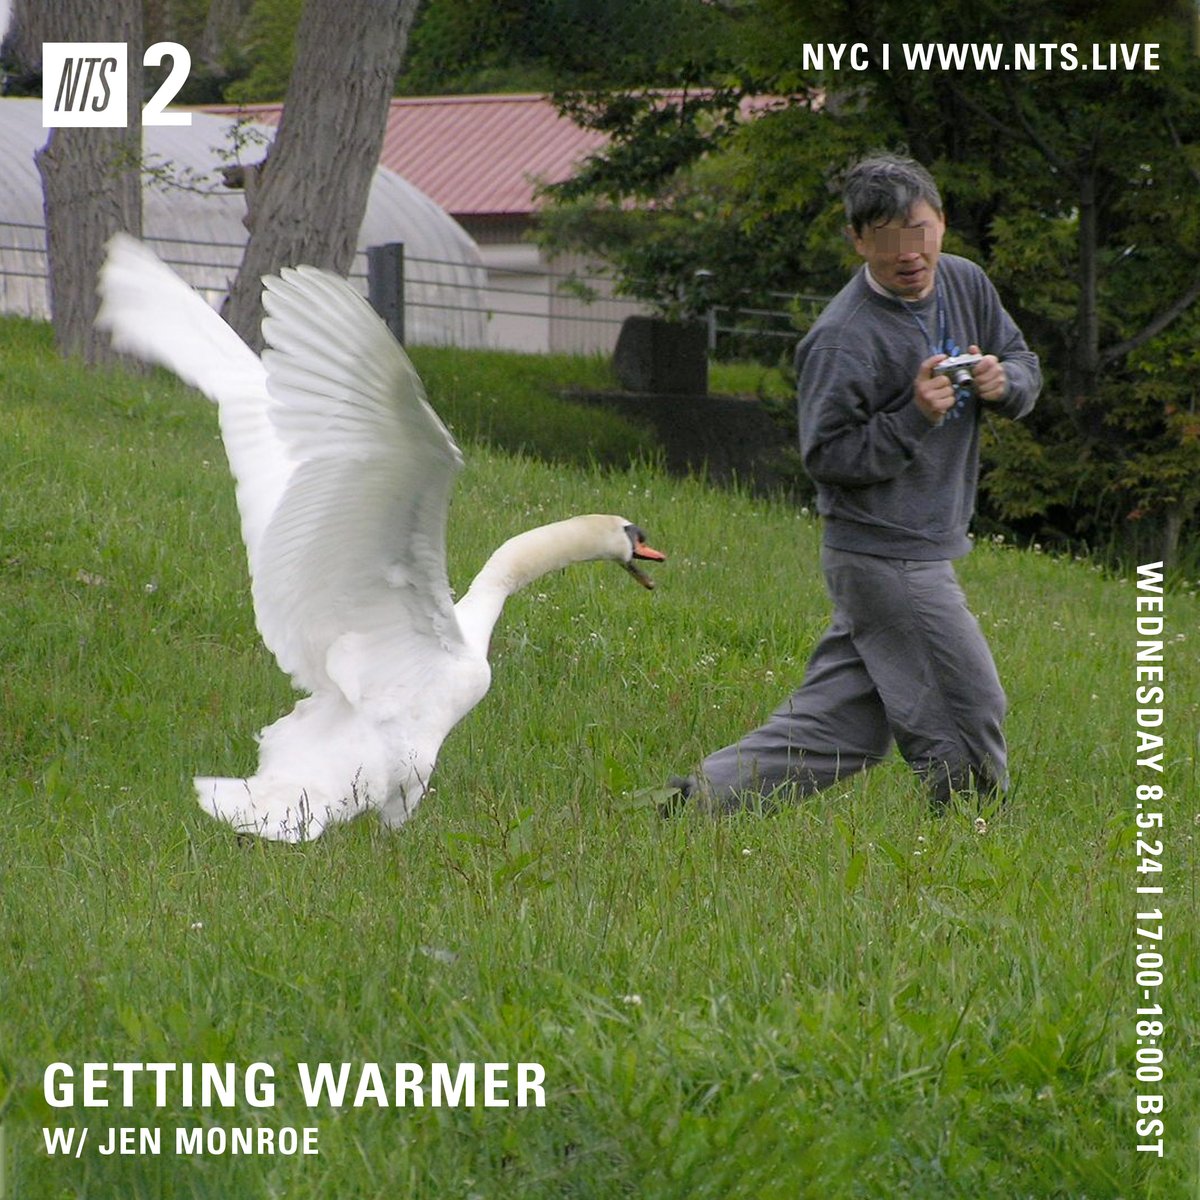 pop, soft rock, synth pop and more from Jen Monroe @listen22this on Getting Warmer - 5pm BST 
nts.live/shows/jen-monr…